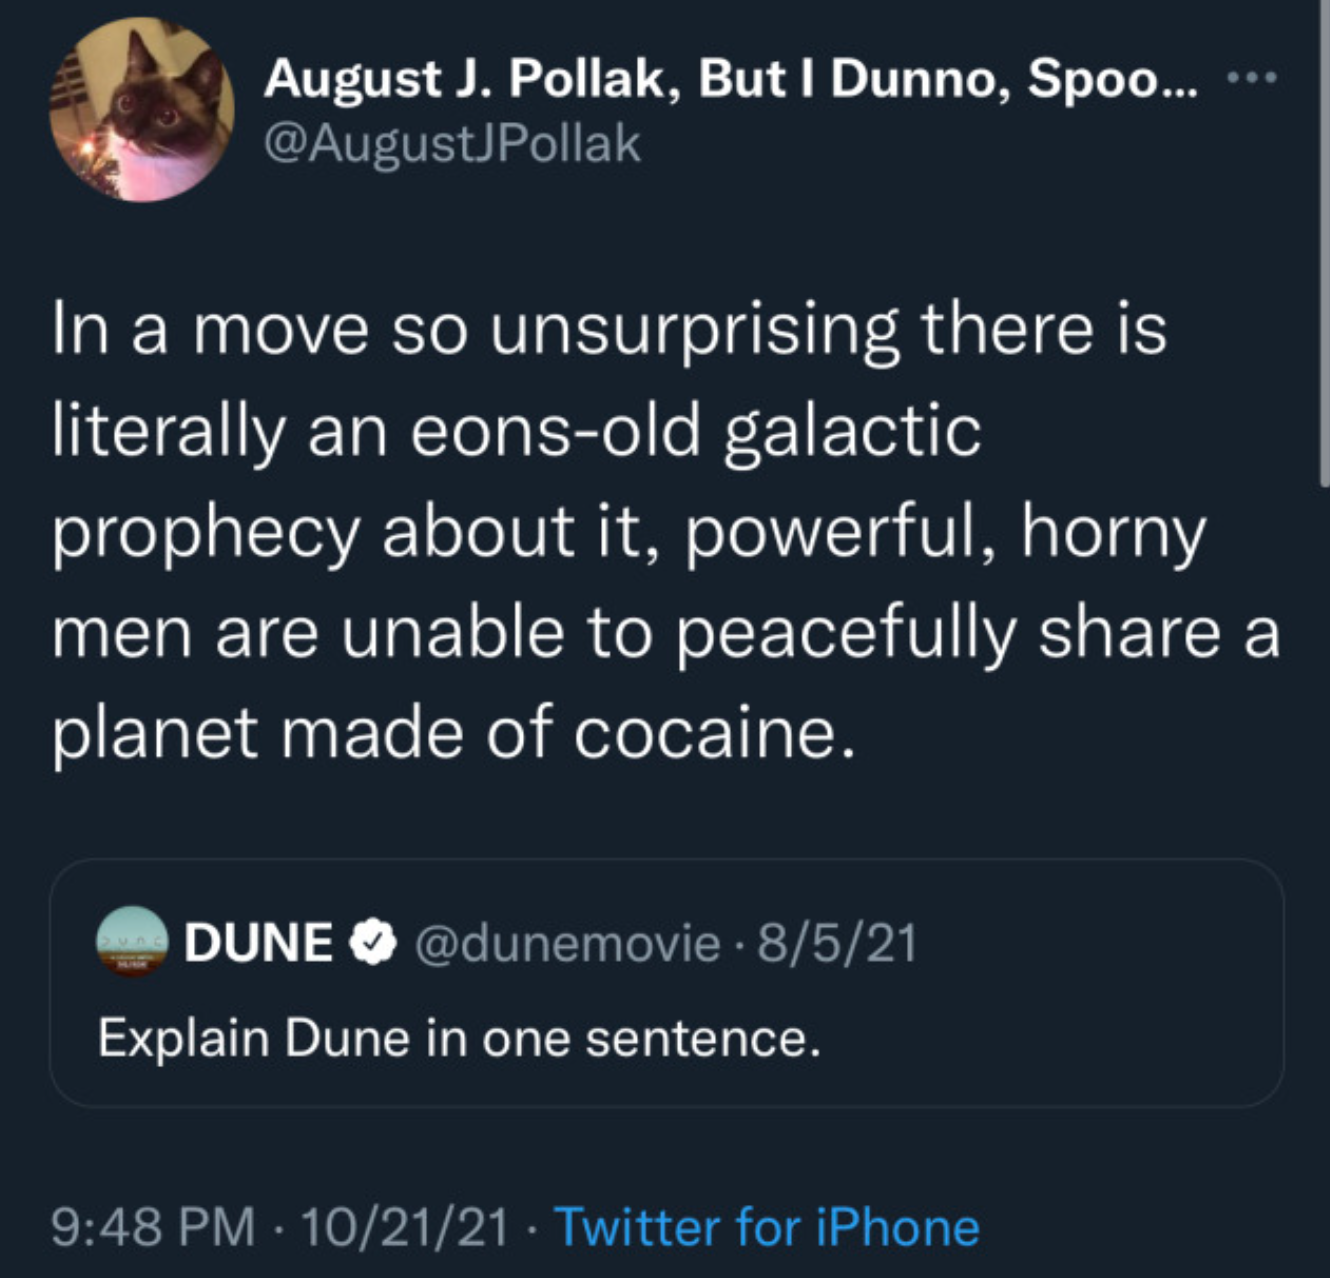 dune memes  - screenshot - August J. Pollak, But I Dunno, Spoo... In a move so unsurprising there is literally an eonsold galactic prophecy about it, powerful, horny men are unable to peacefully a planet made of cocaine. Dune . 8521 Explain Dune in one se